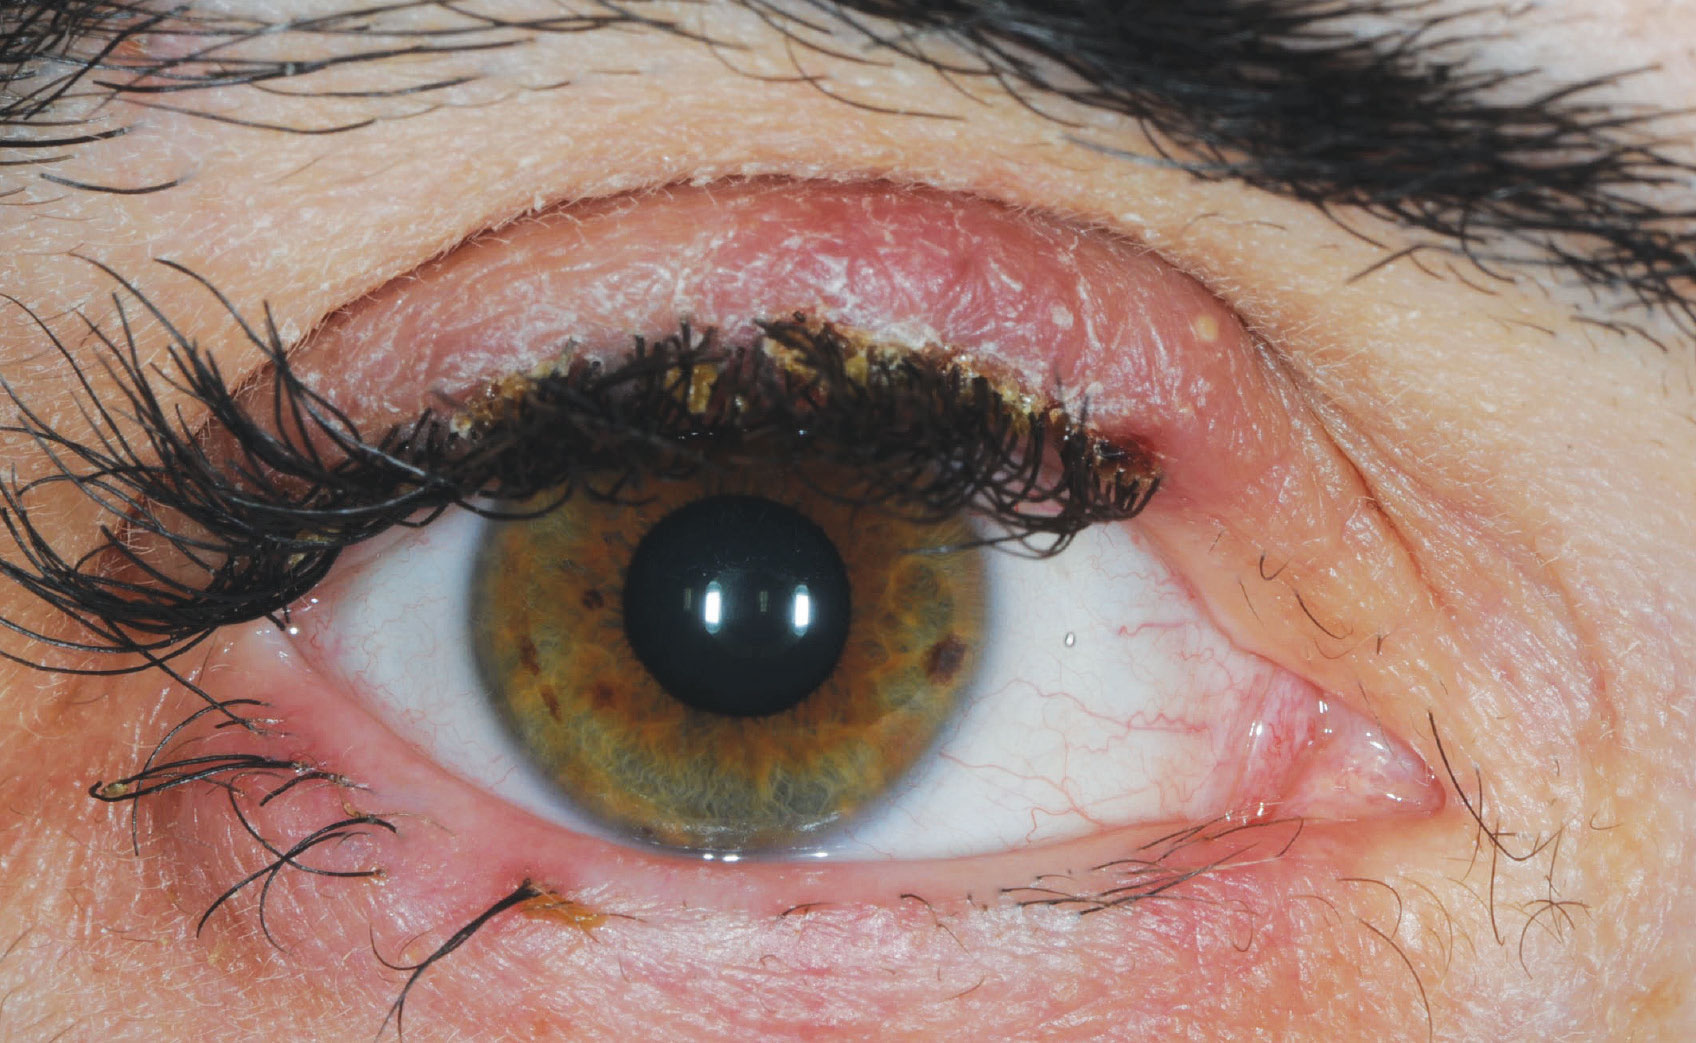 Fig. 3. Blepharitis and trichomegaly in a patient treated with an EGFR inhibitor.